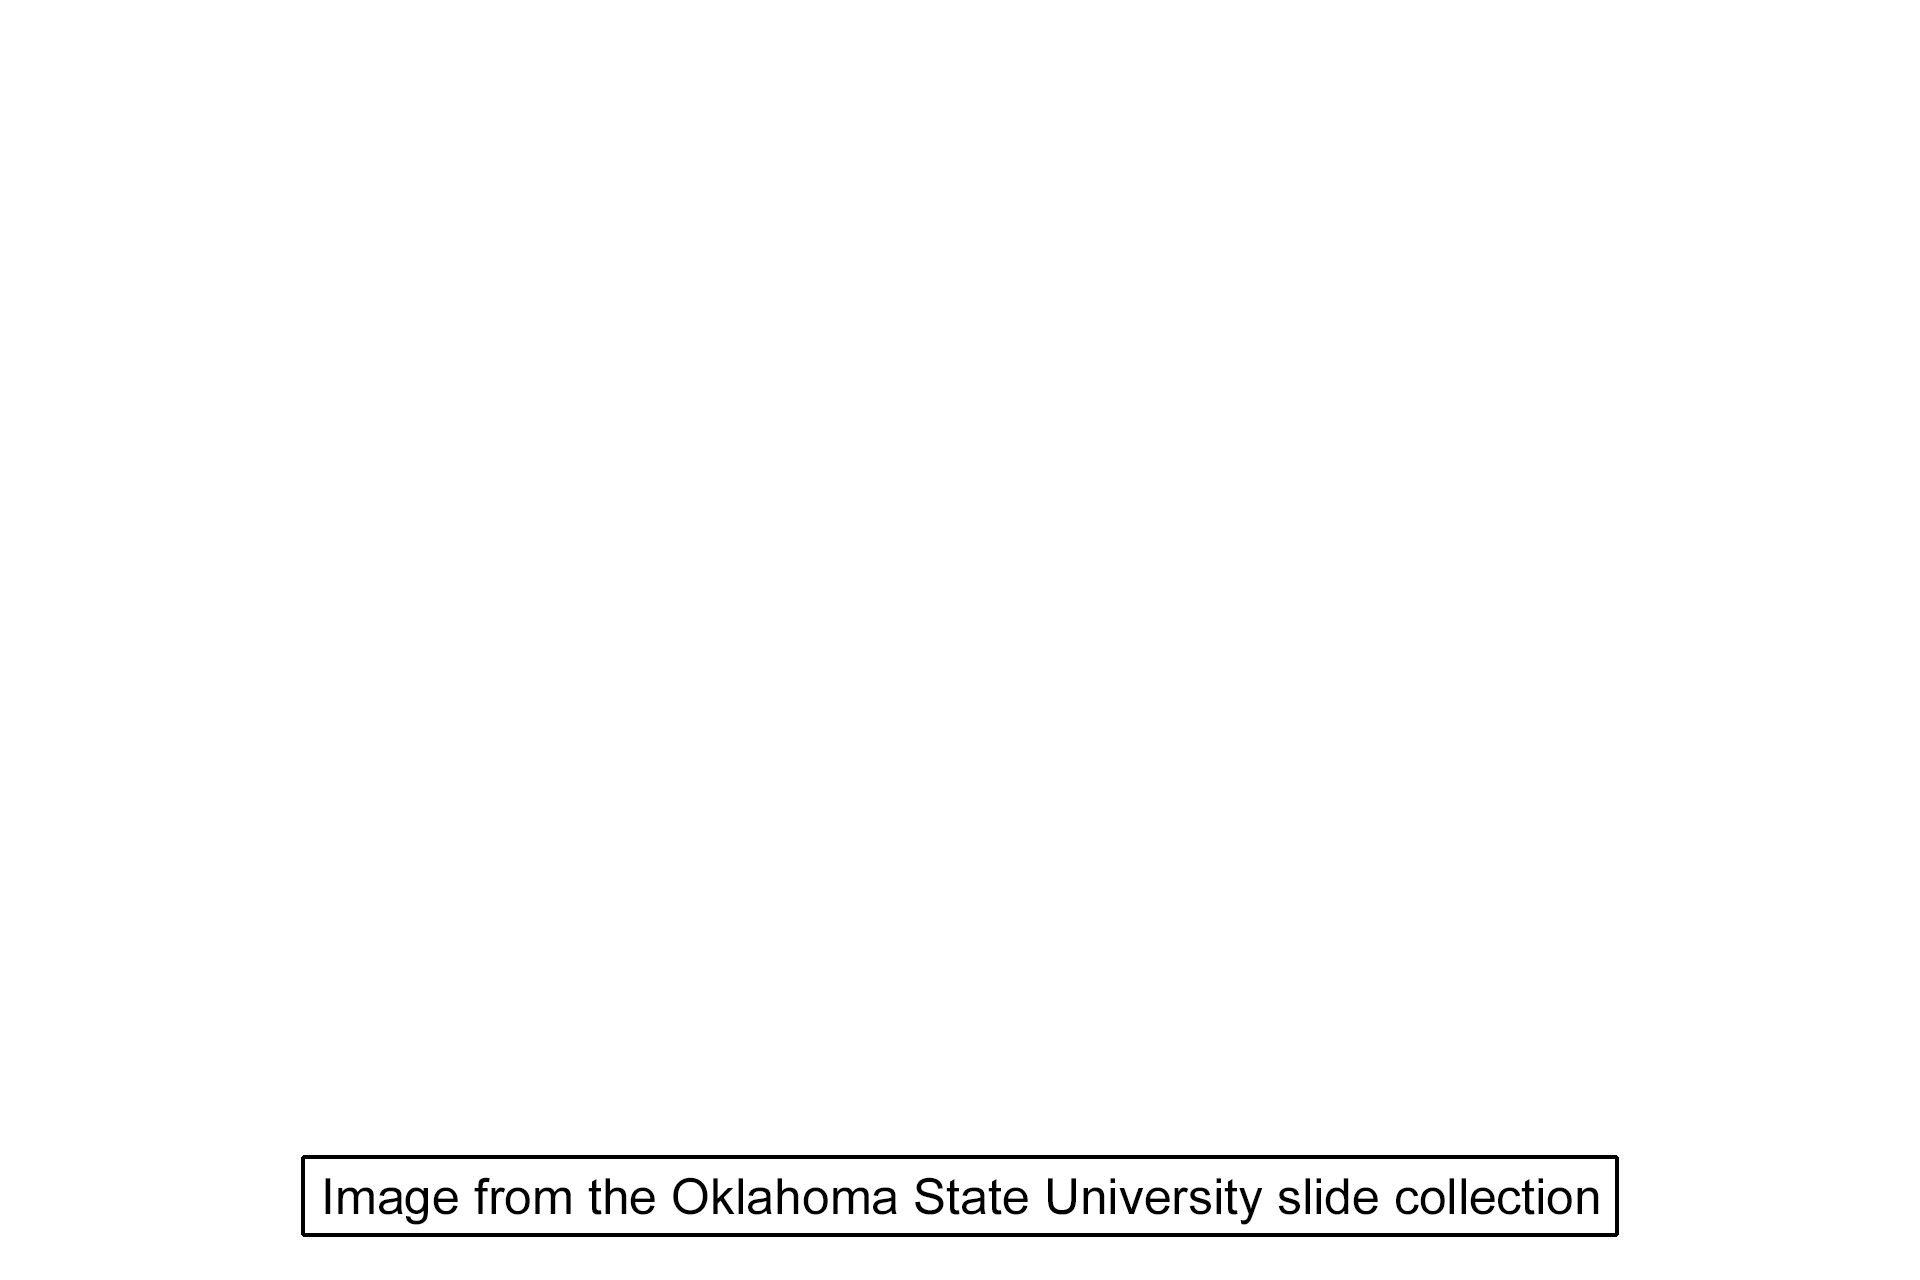 Image source > <p>This image was taken of slide in the Oklahoma State University slide collection.</p>
